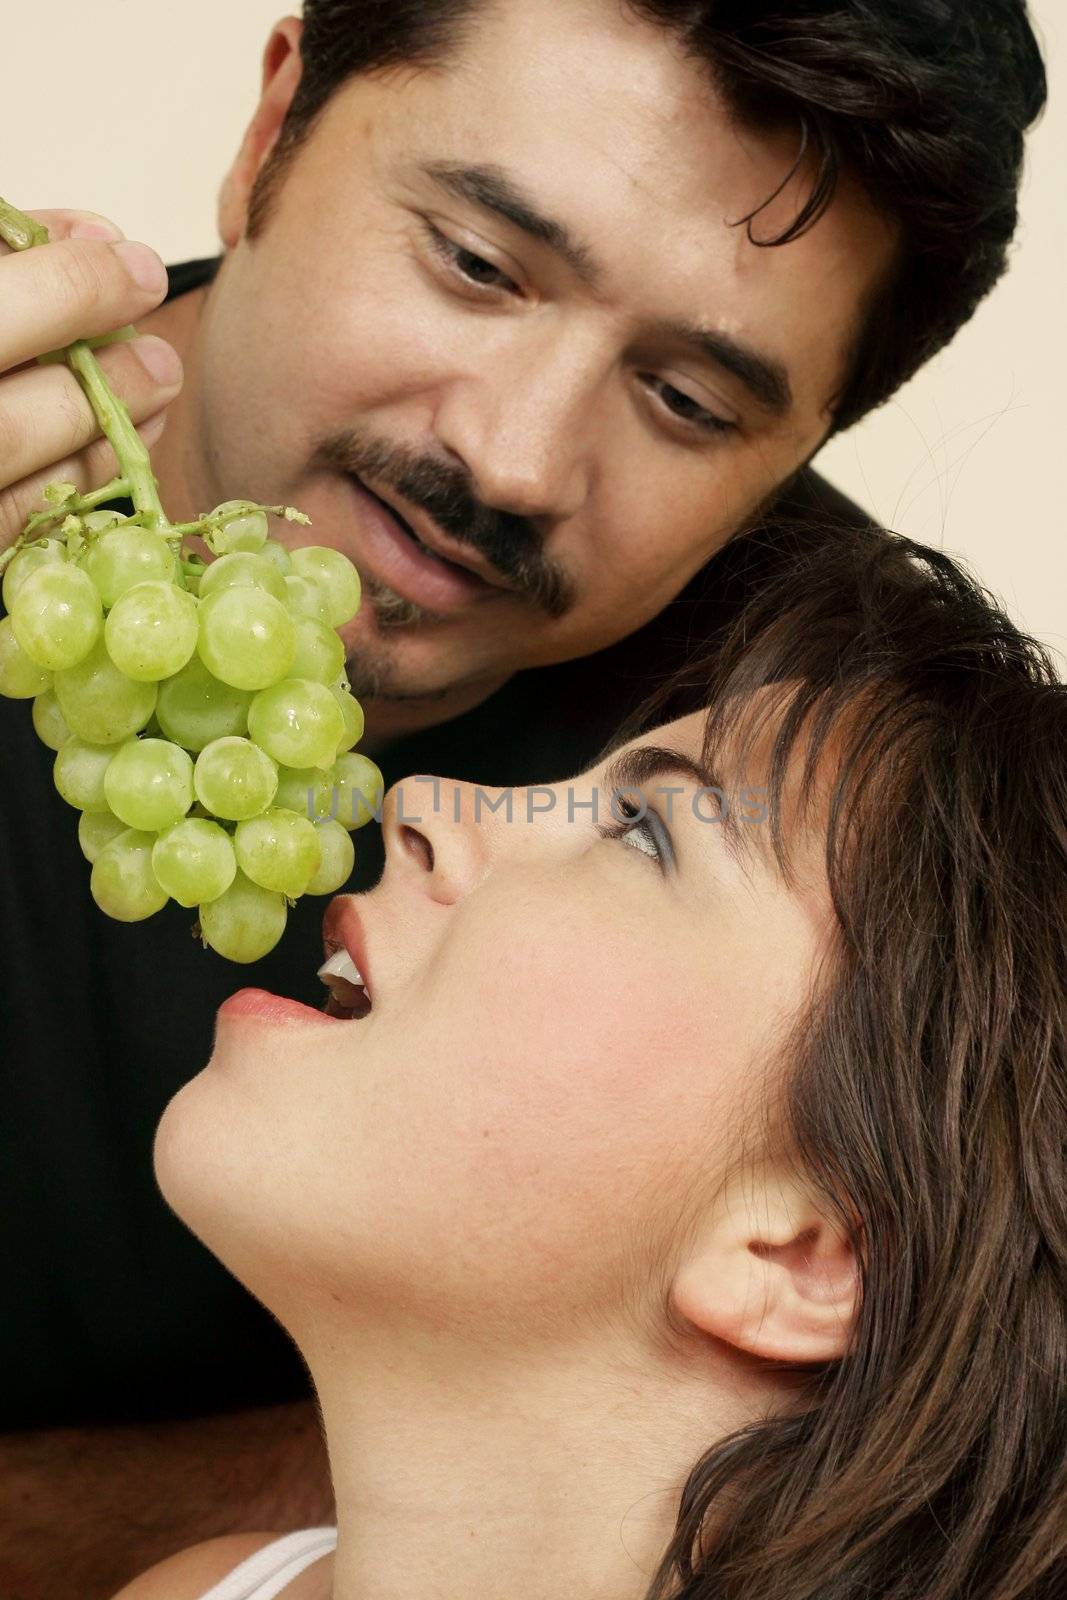 Playfully offers her grapes